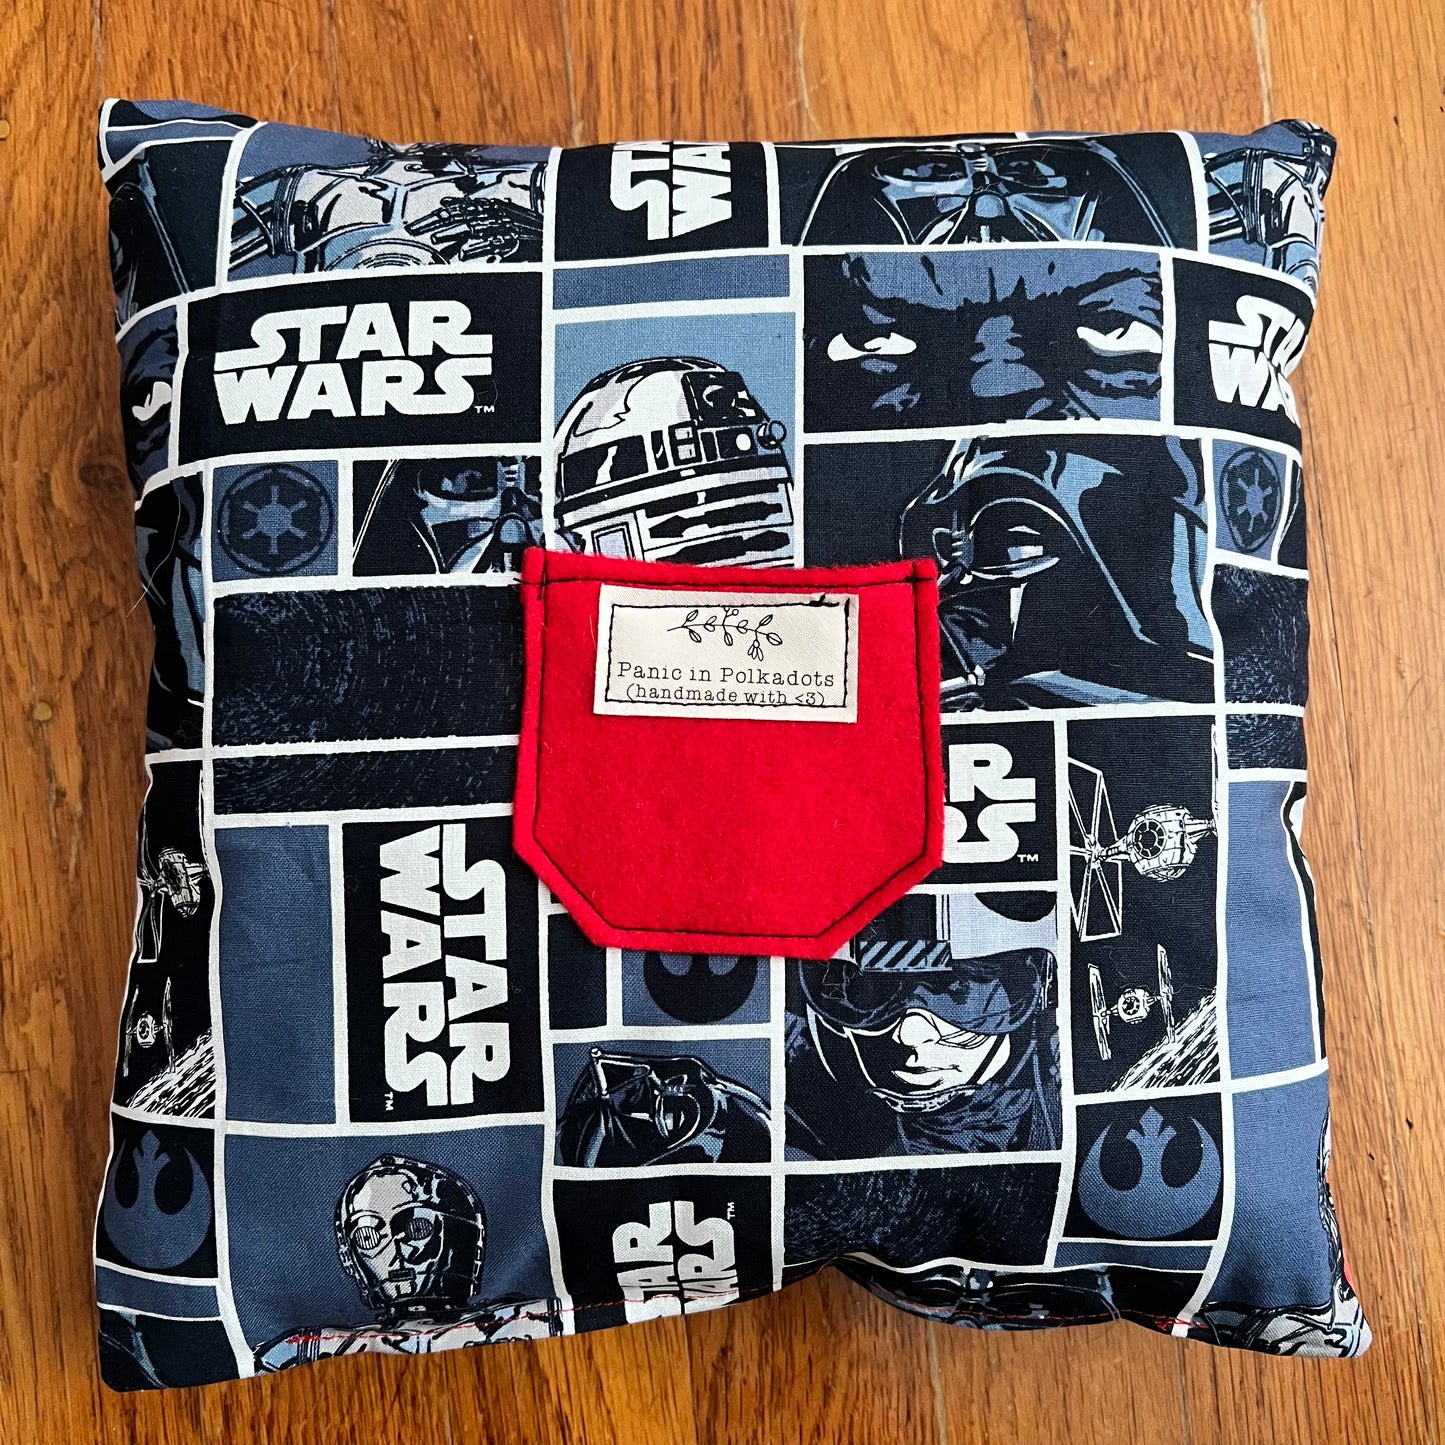 back view of pillow, with star wars print, and a felt red pocket with Panic label